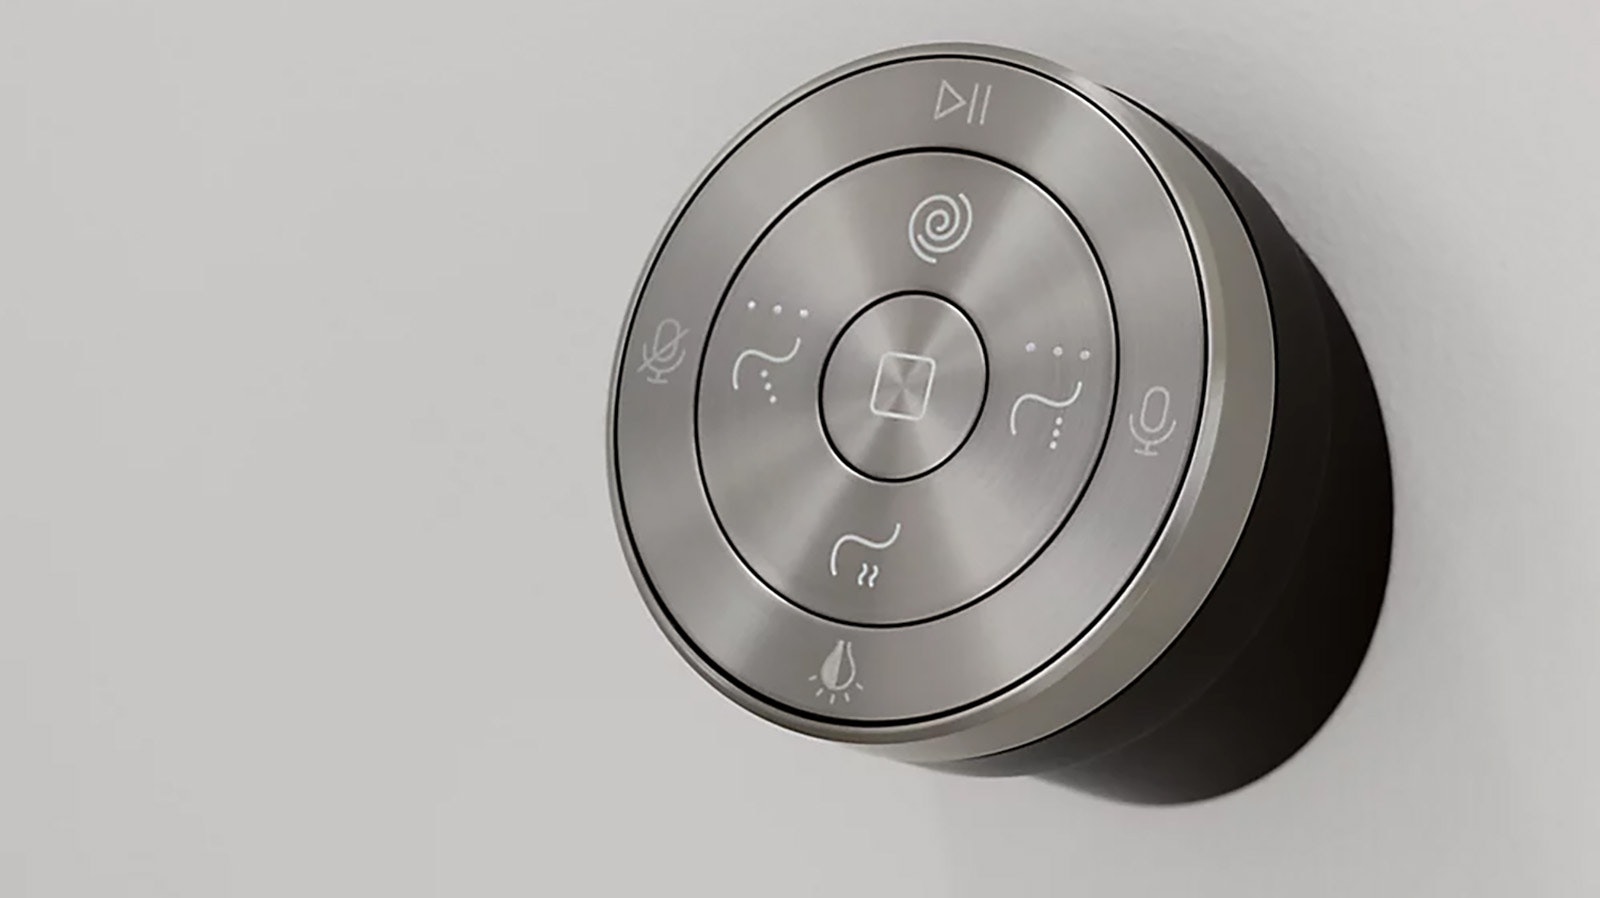 Instead of the typical flush handle, the Kohler Numi 2.0 smart toilet has this control knob with multiple options.